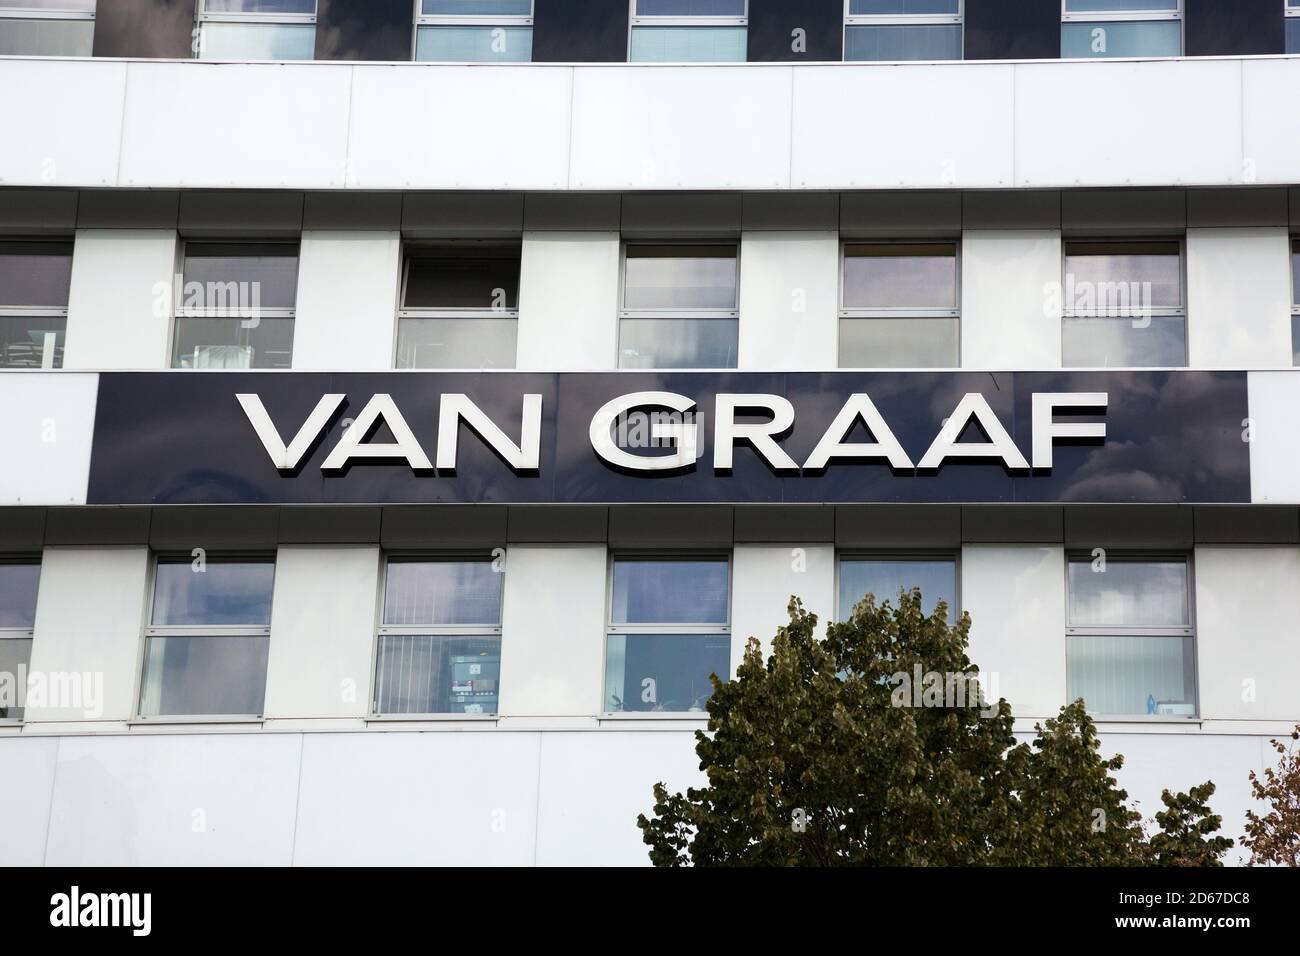 Van sign on clothing store in Stock Photo - Alamy